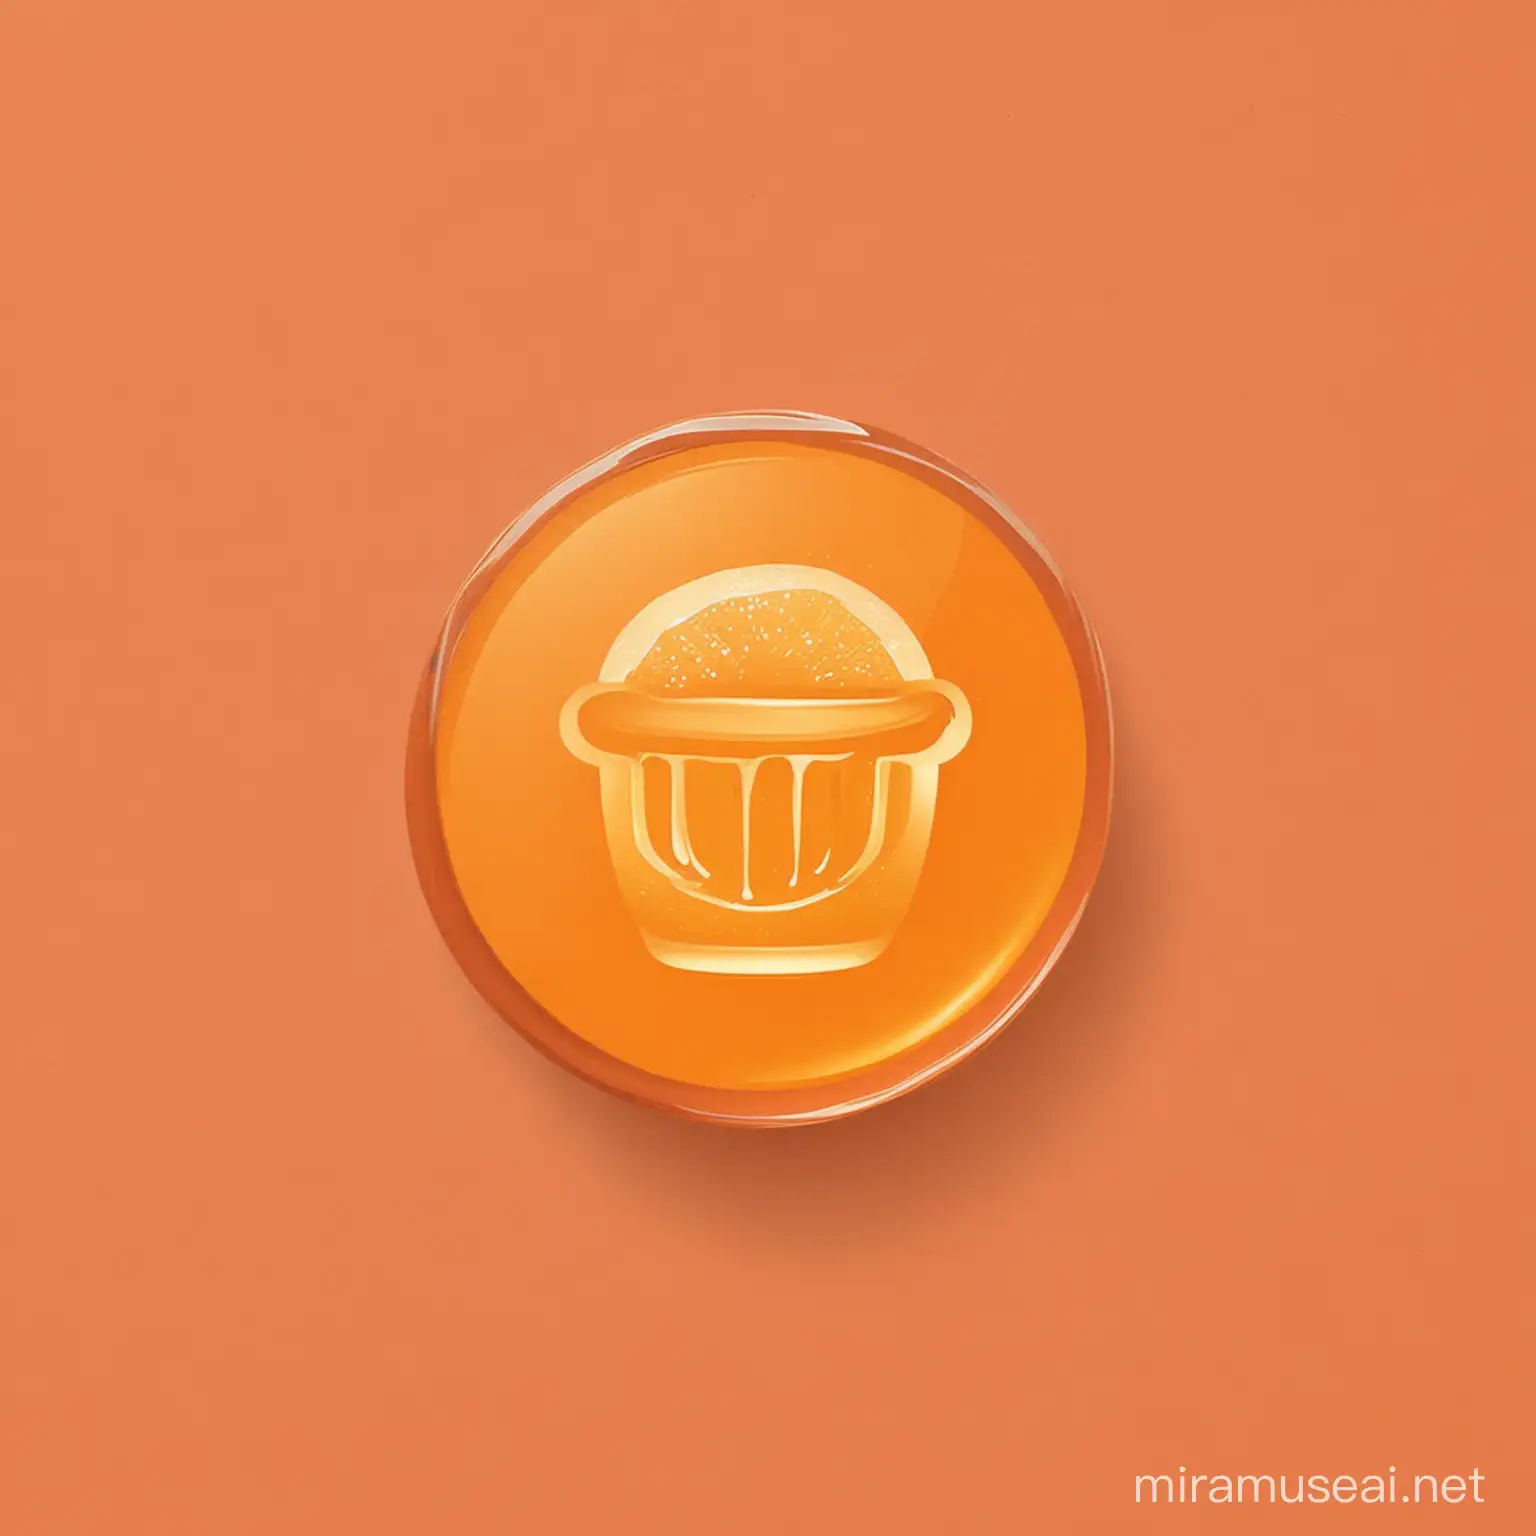 Logo for a recipe app, round shape to match the orange background with transparent background